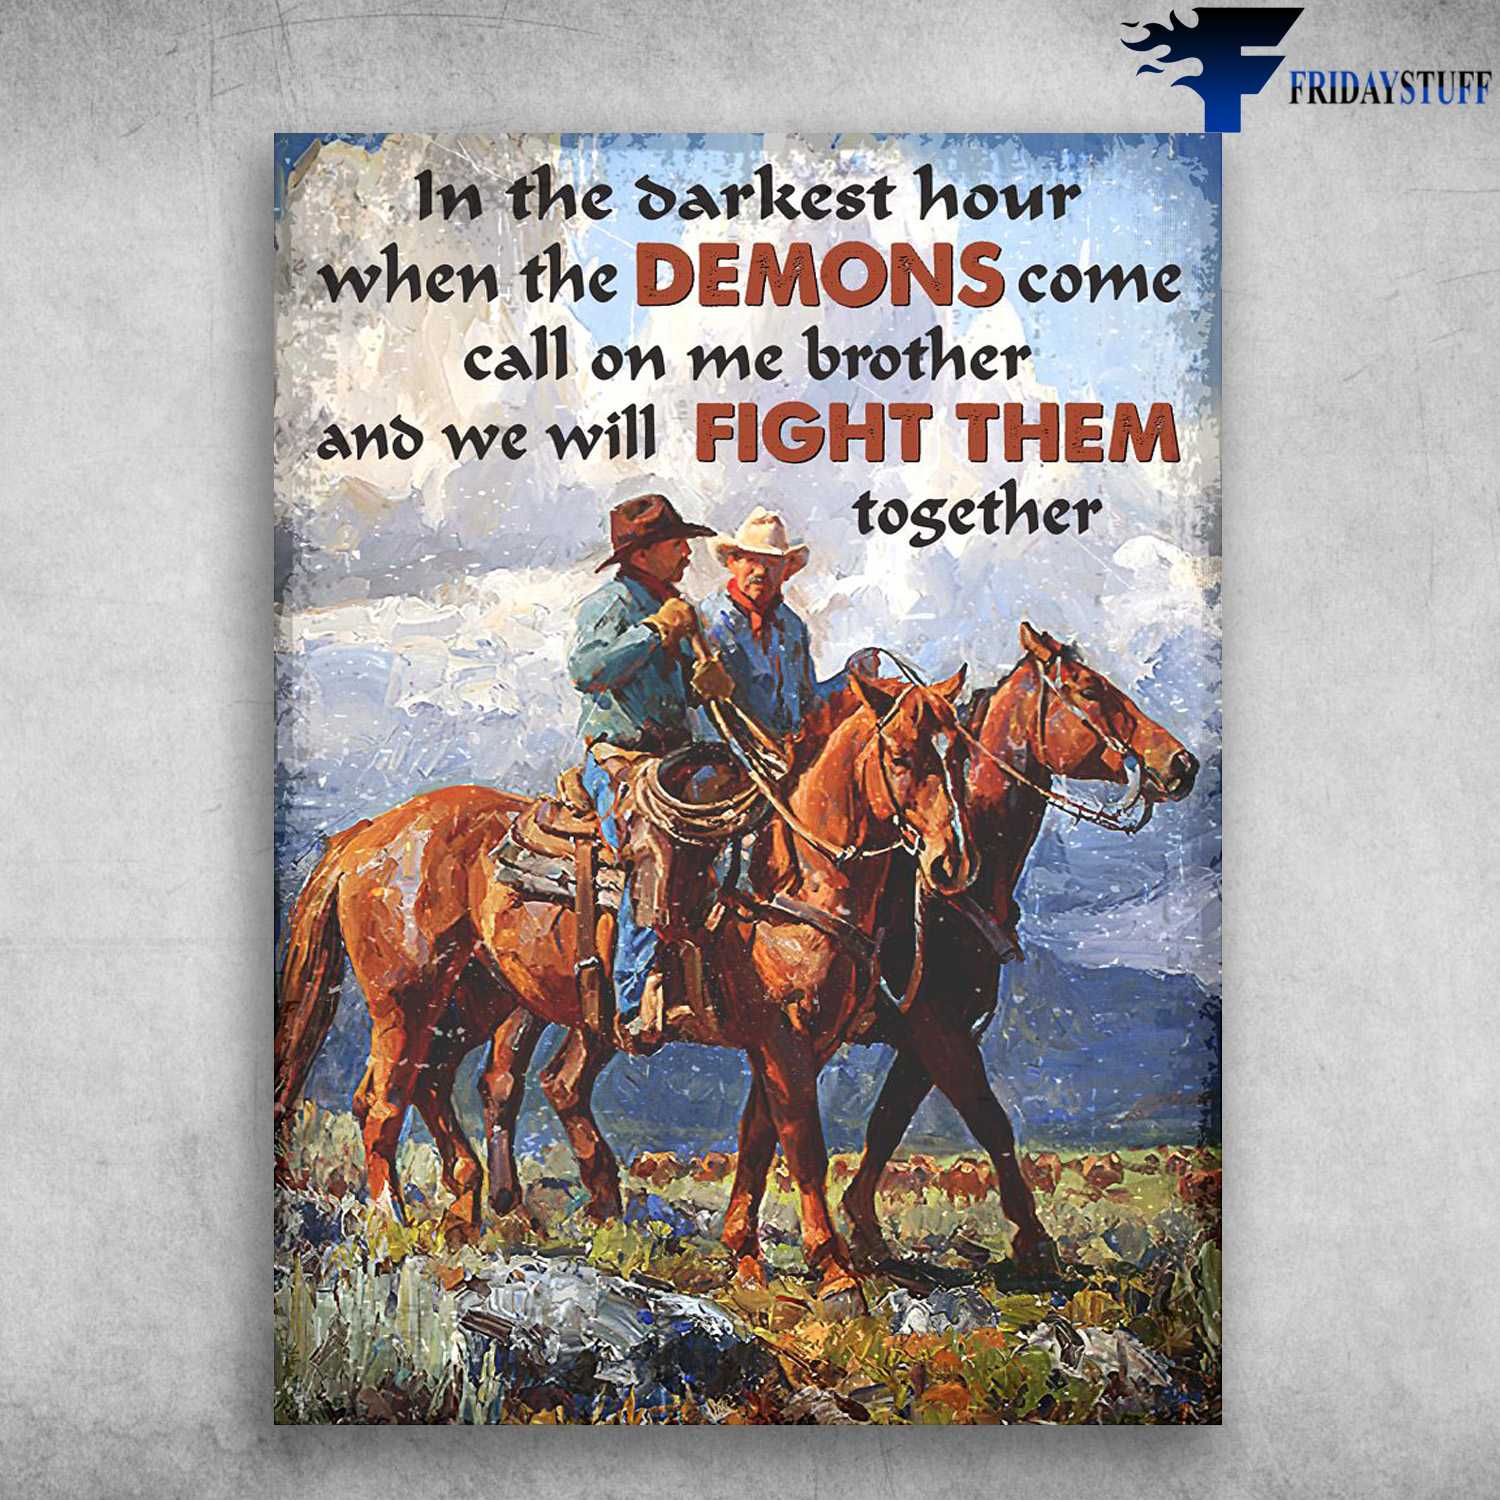 Horse Riding, Cowboy Poster - In The Darkest Hour, When The Demons Come, Call On Me Brother, And We Will FIght Them Together